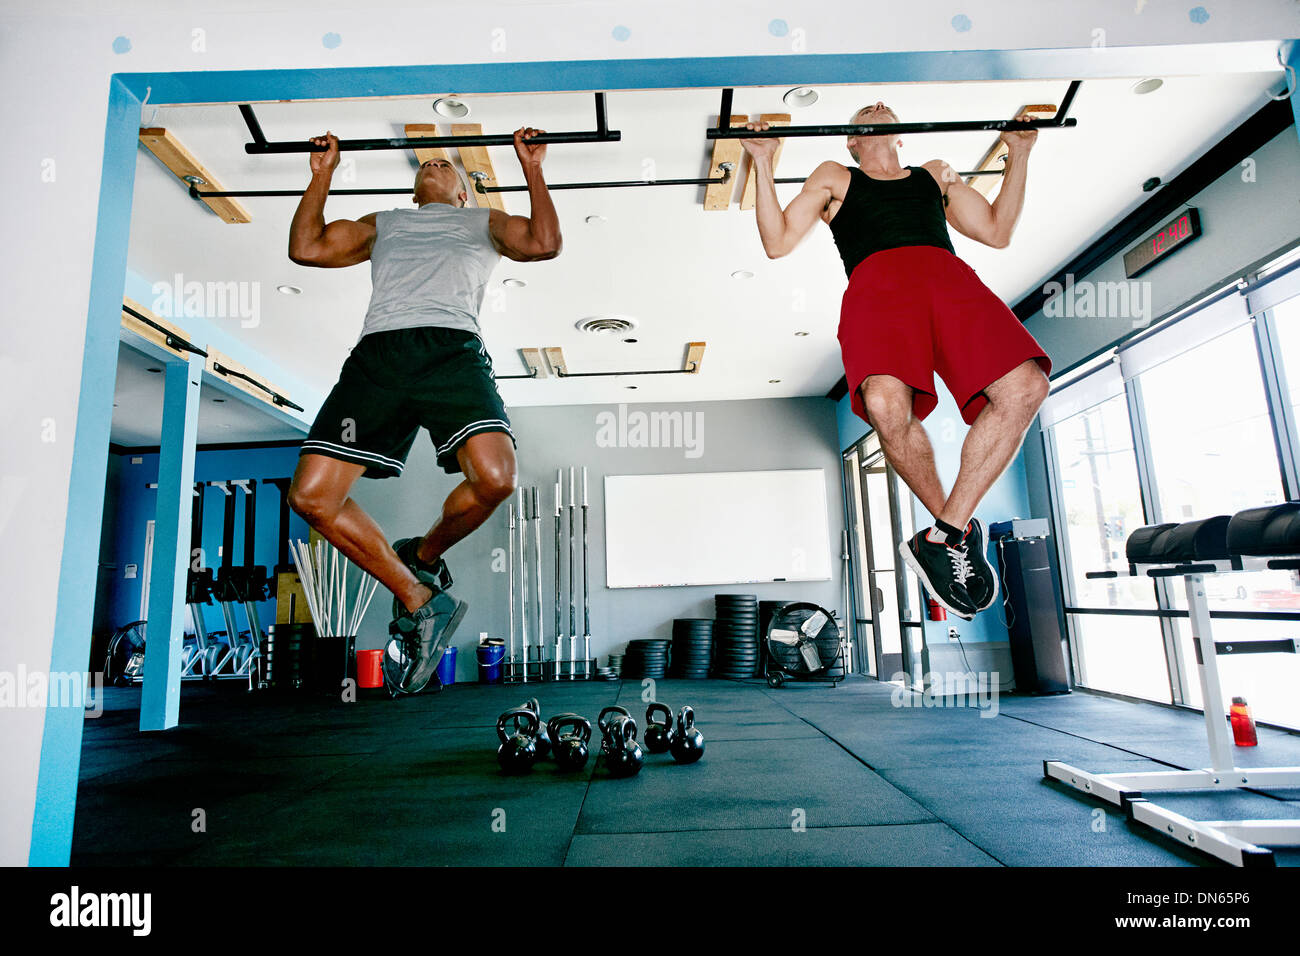 Men working out in gym Stock Photo